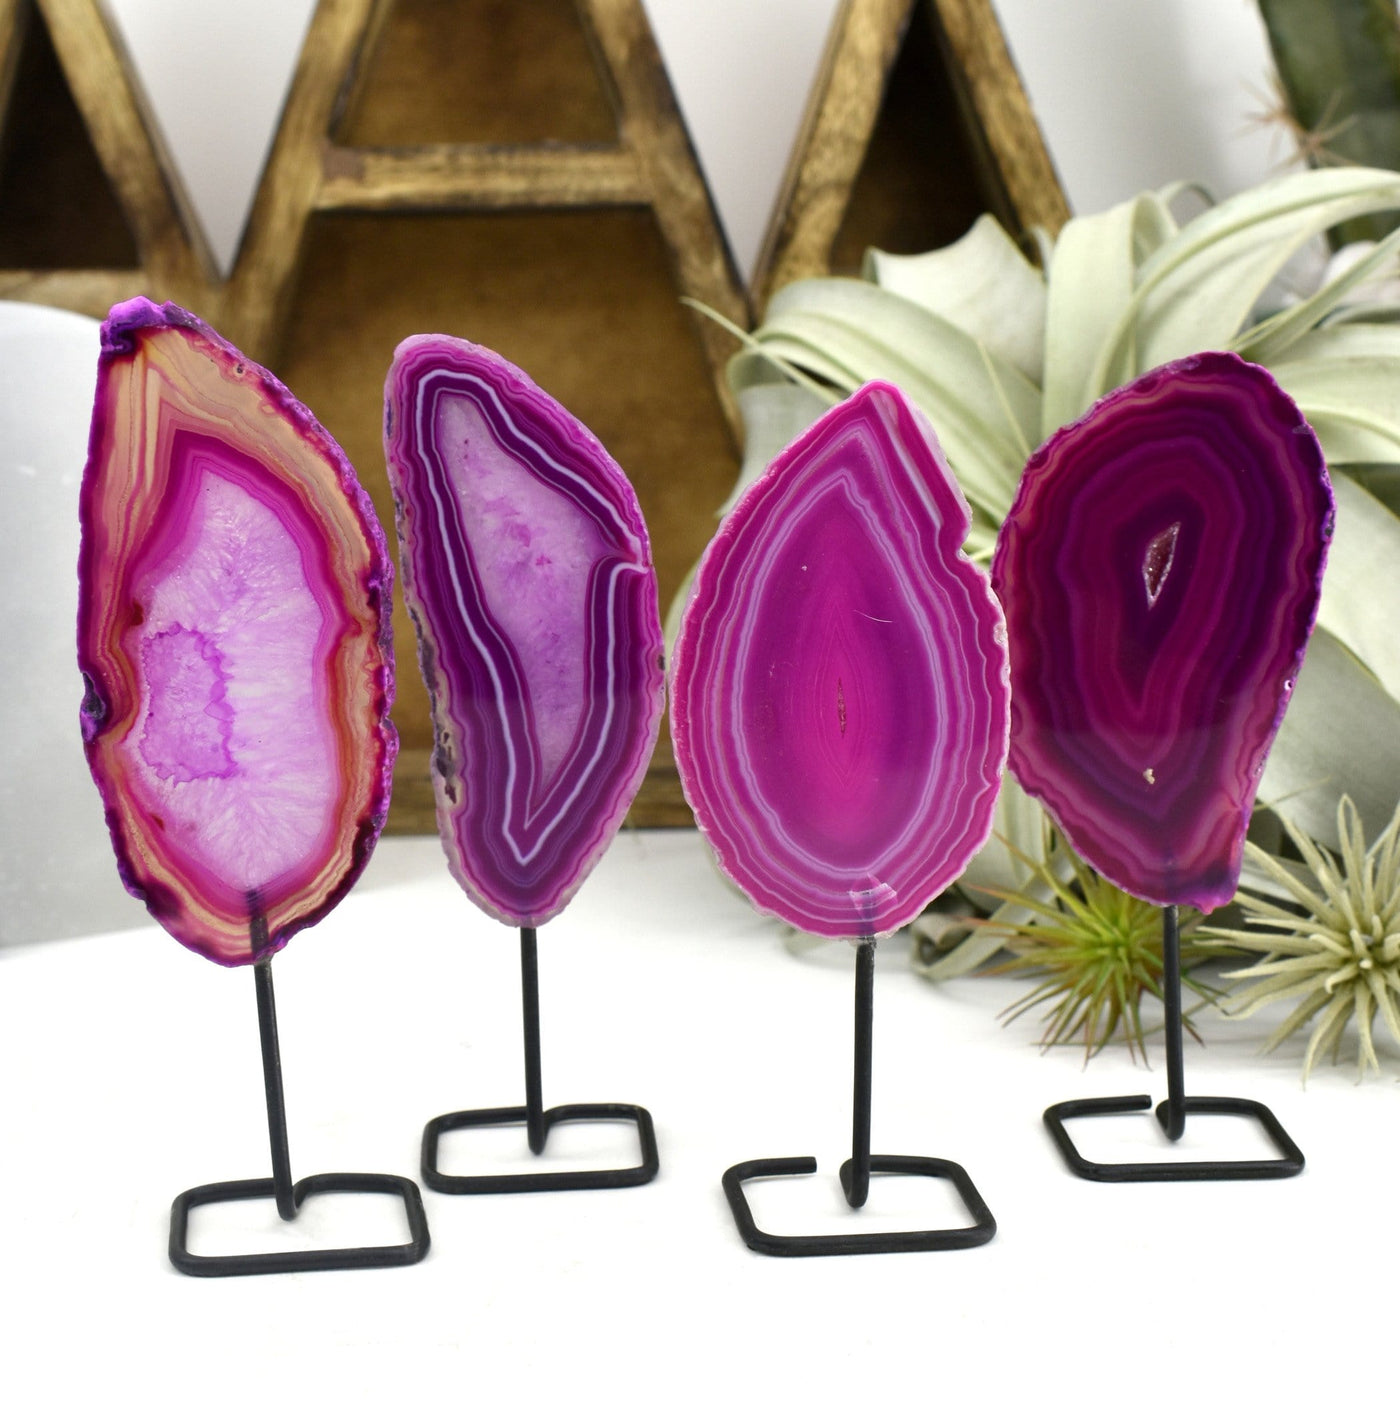 Four of the pink agate on metal stand are being shown in this picture.